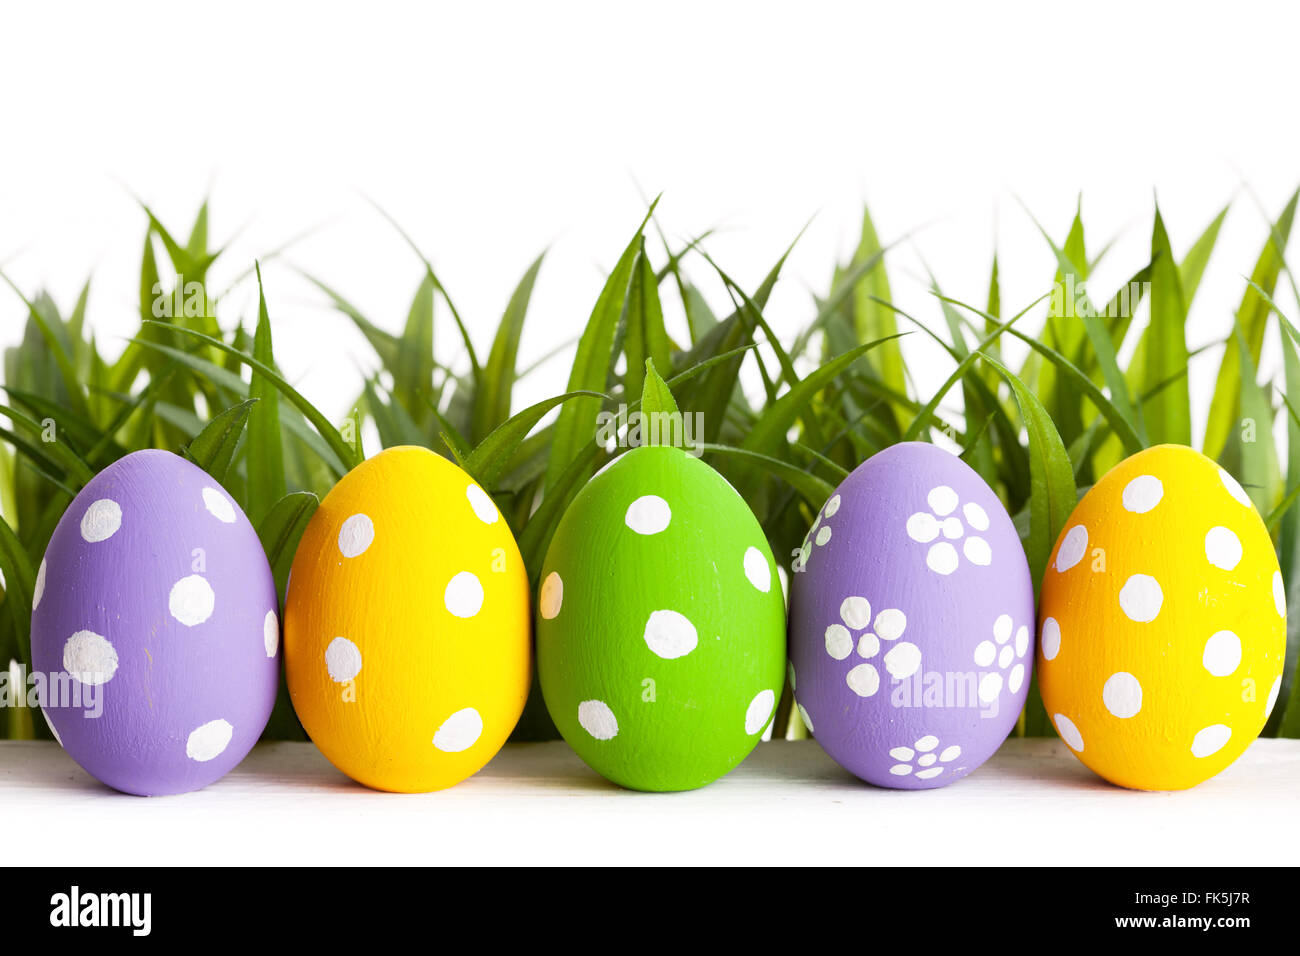 Row of Easter eggs on grass Stock Photo